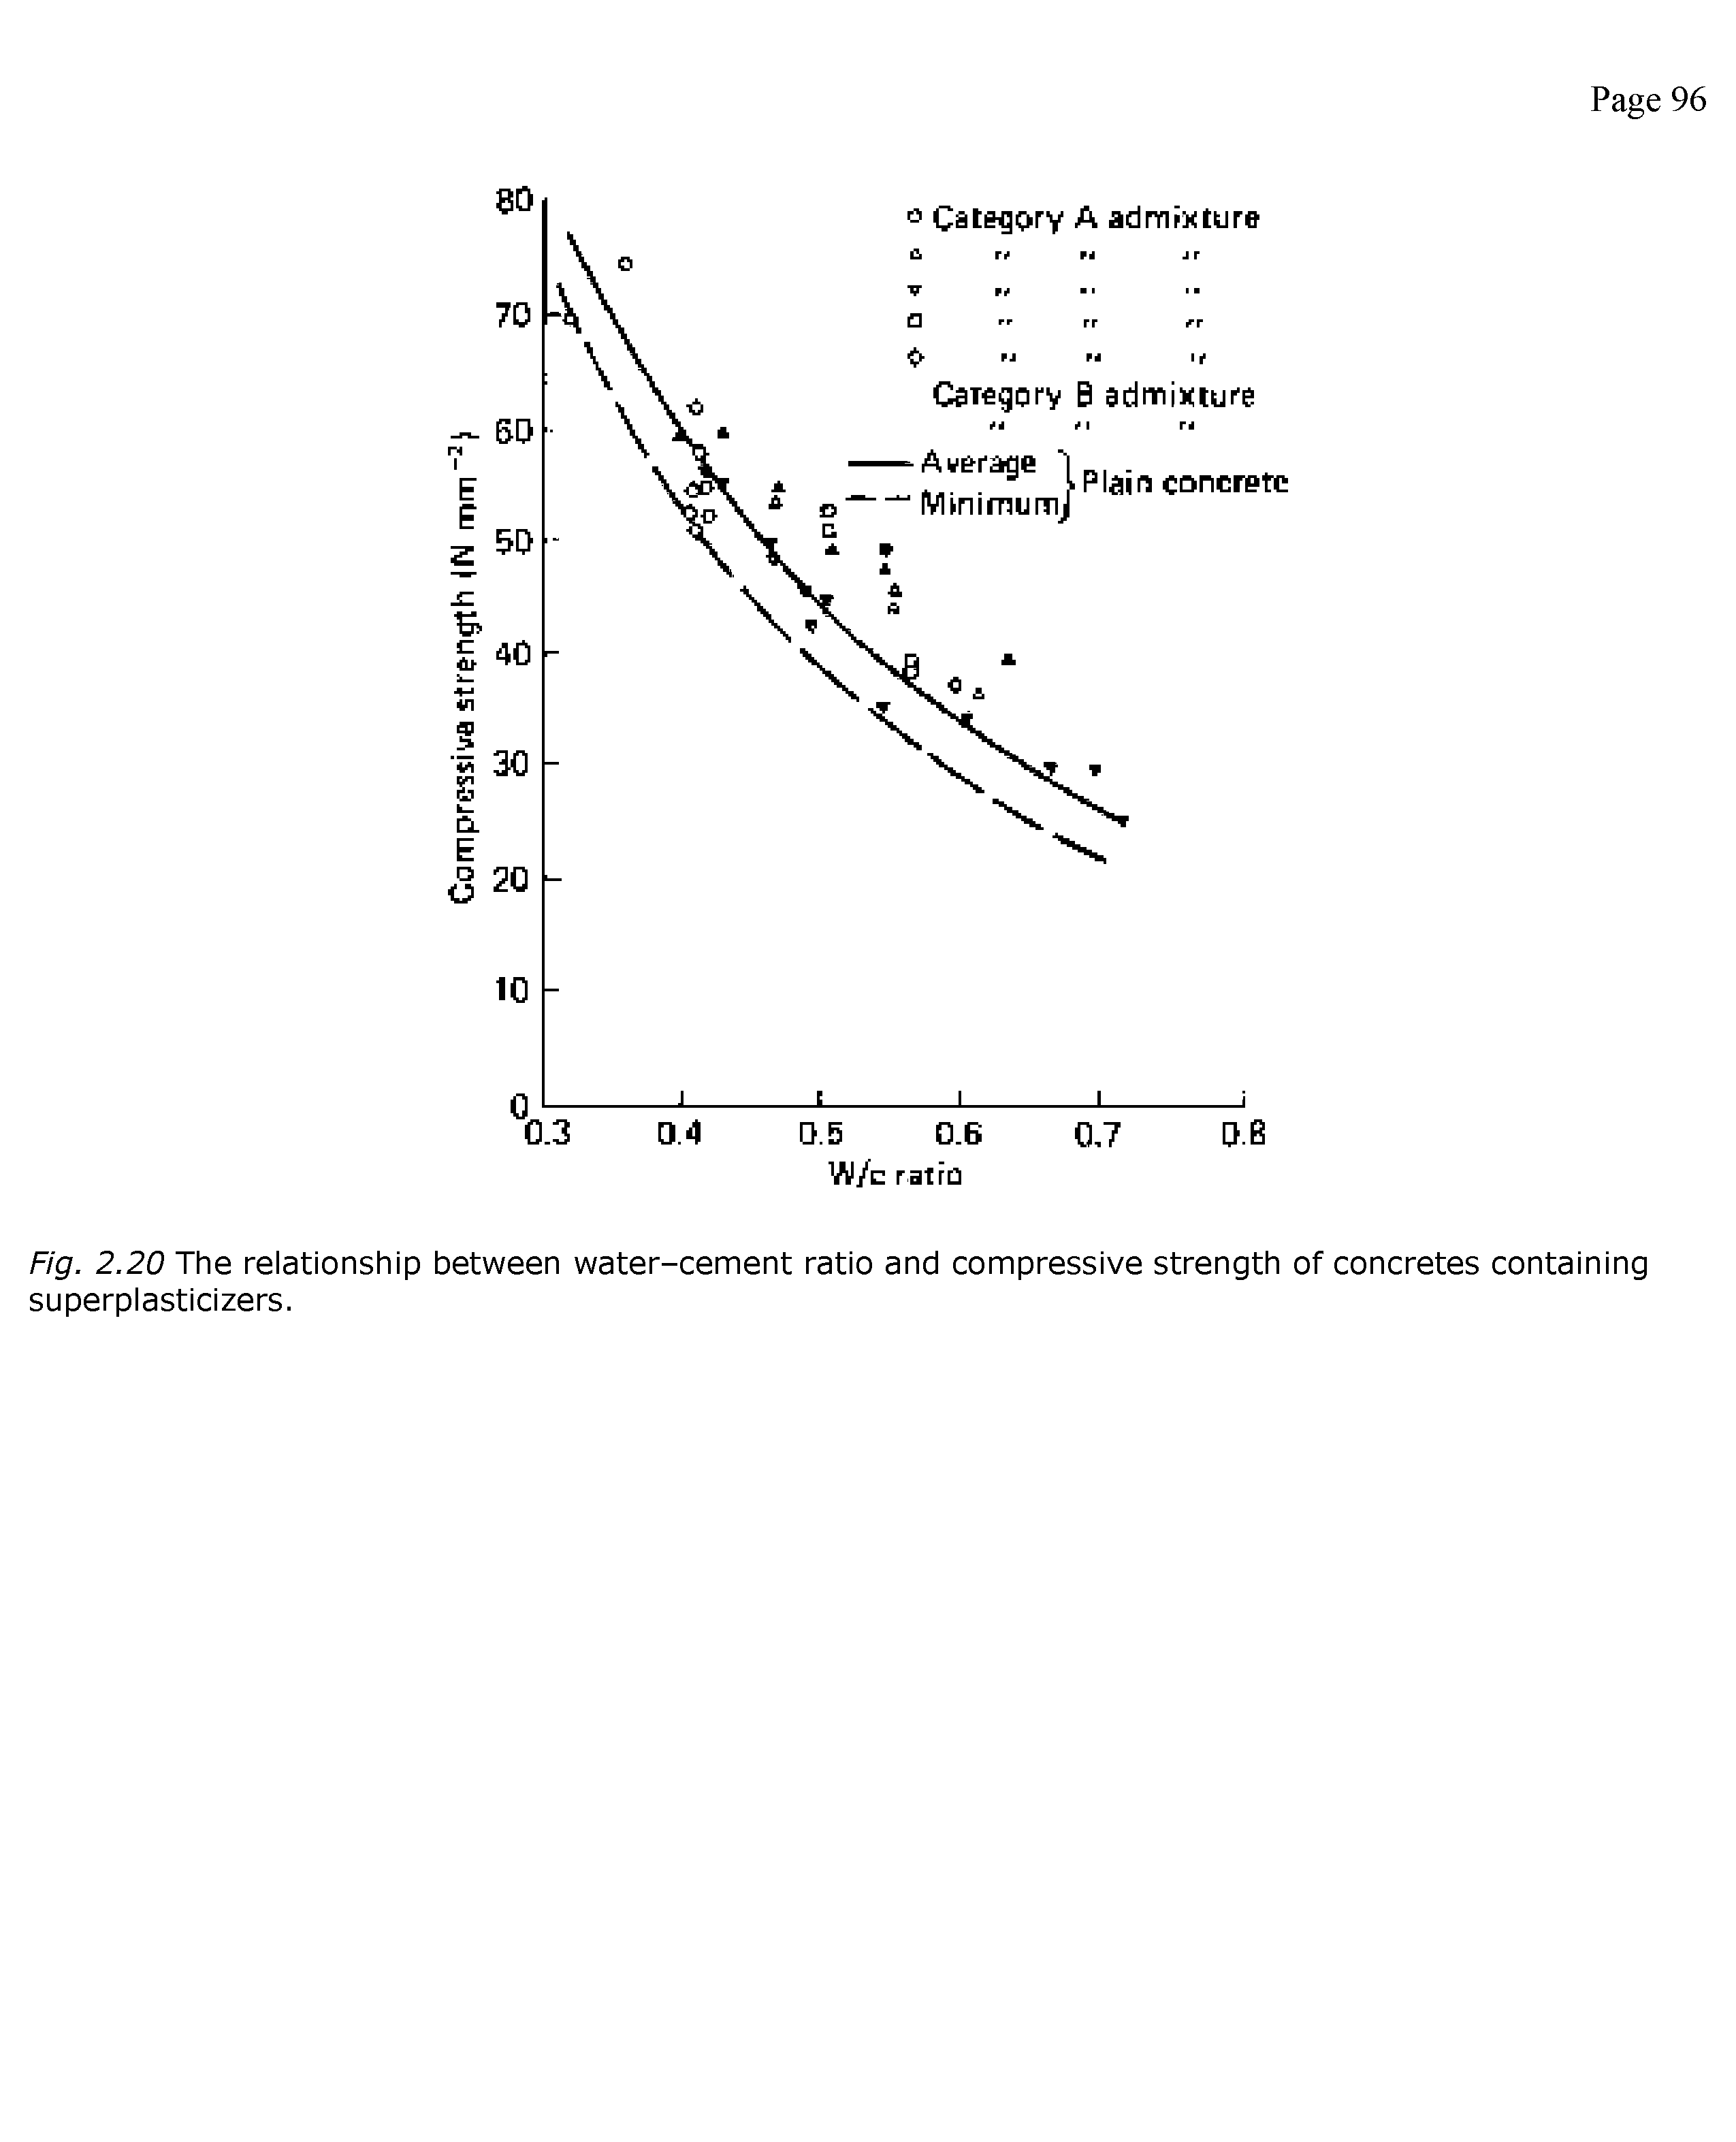 Fig. 2.20 The relationship between water-cement ratio and compressive strength of concretes containing superplasticizers.